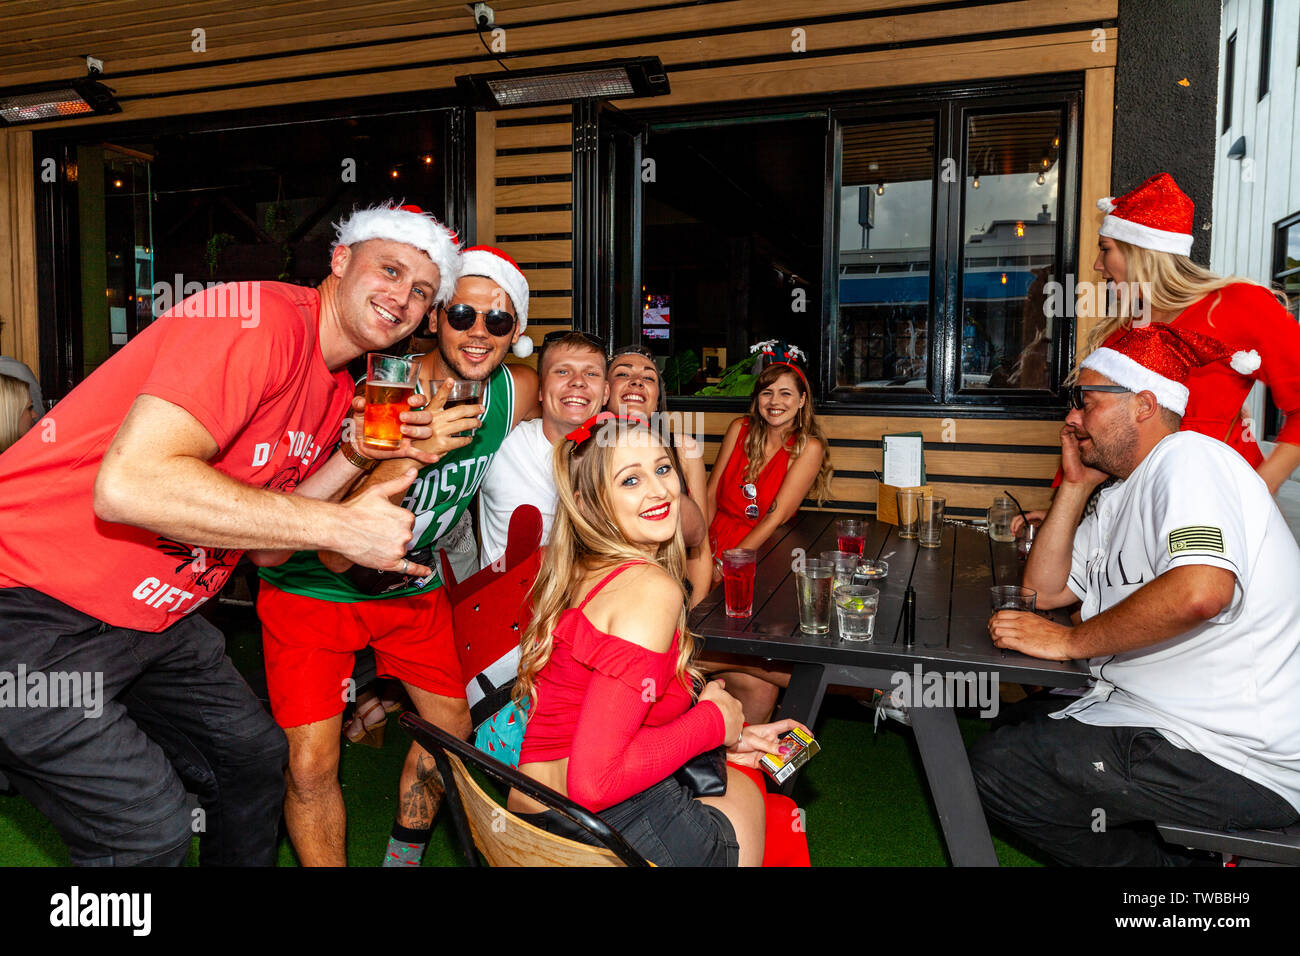 A Group Of Young People Celebrating Christmas, Whangarei, North Island, New Zealand Stock Photo